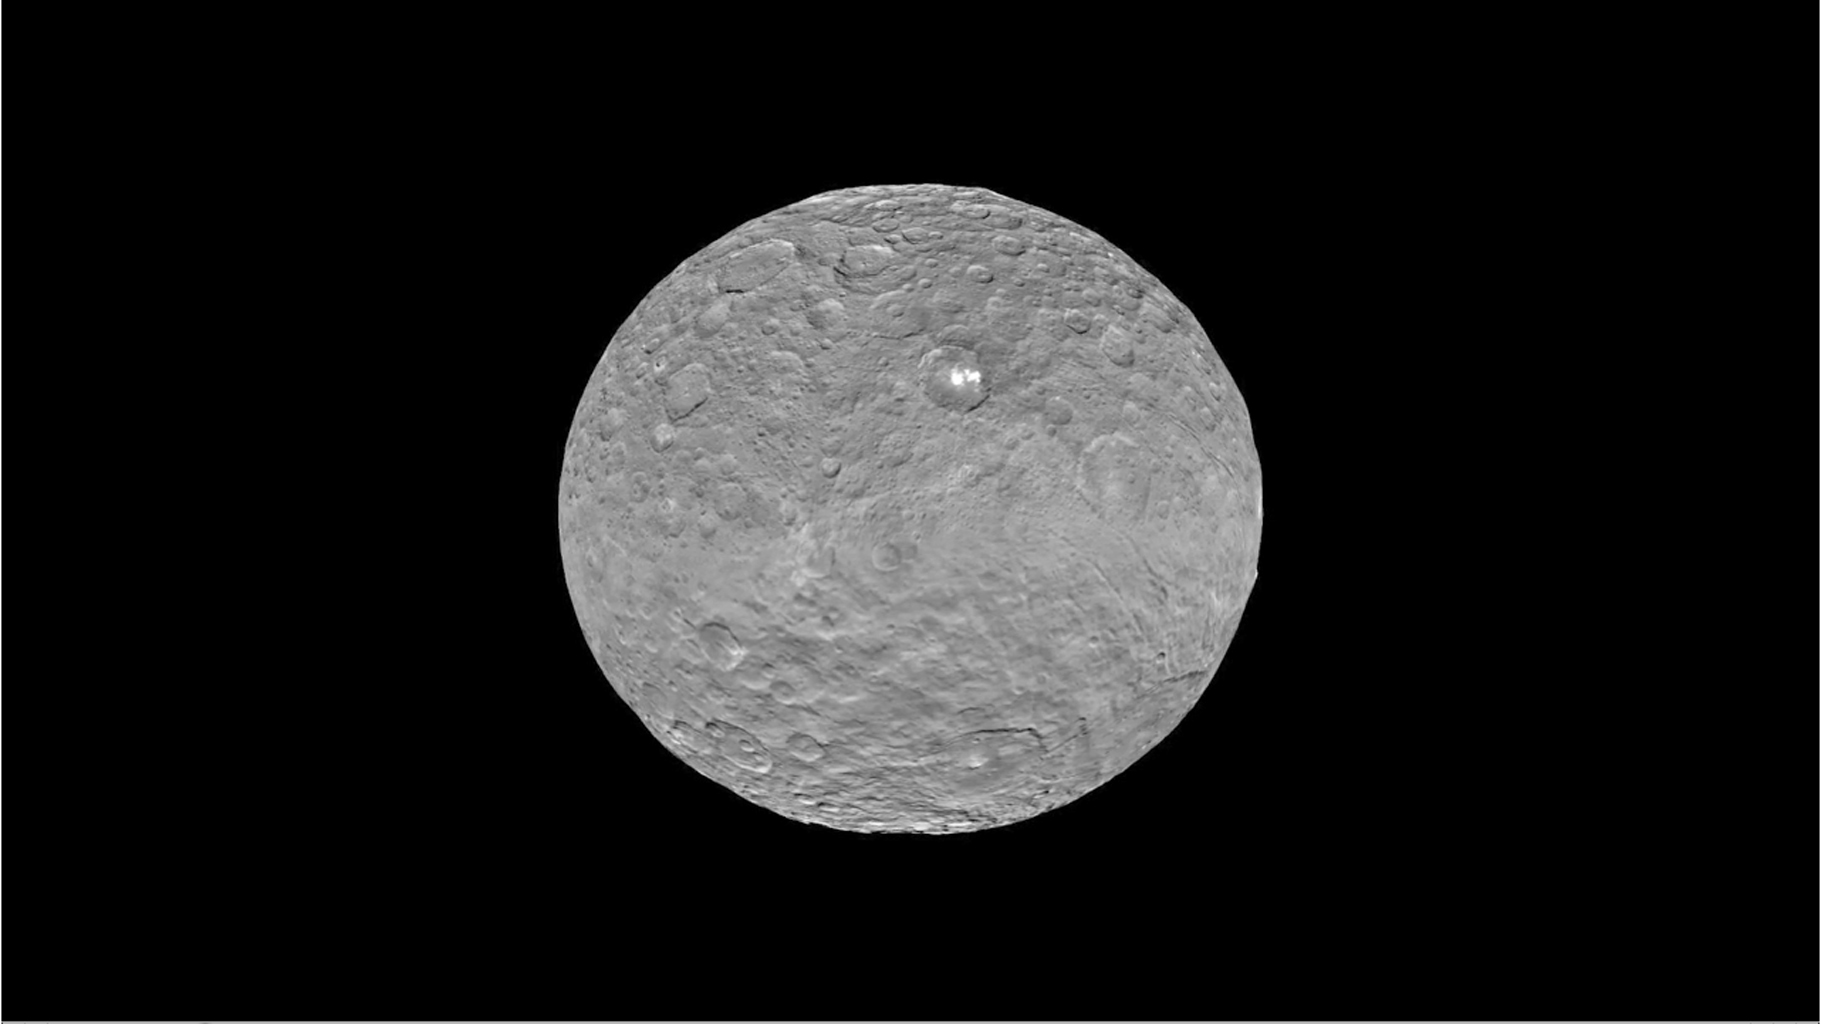 Ceres Animations: Global View, Occator, Mountain, 3-D View